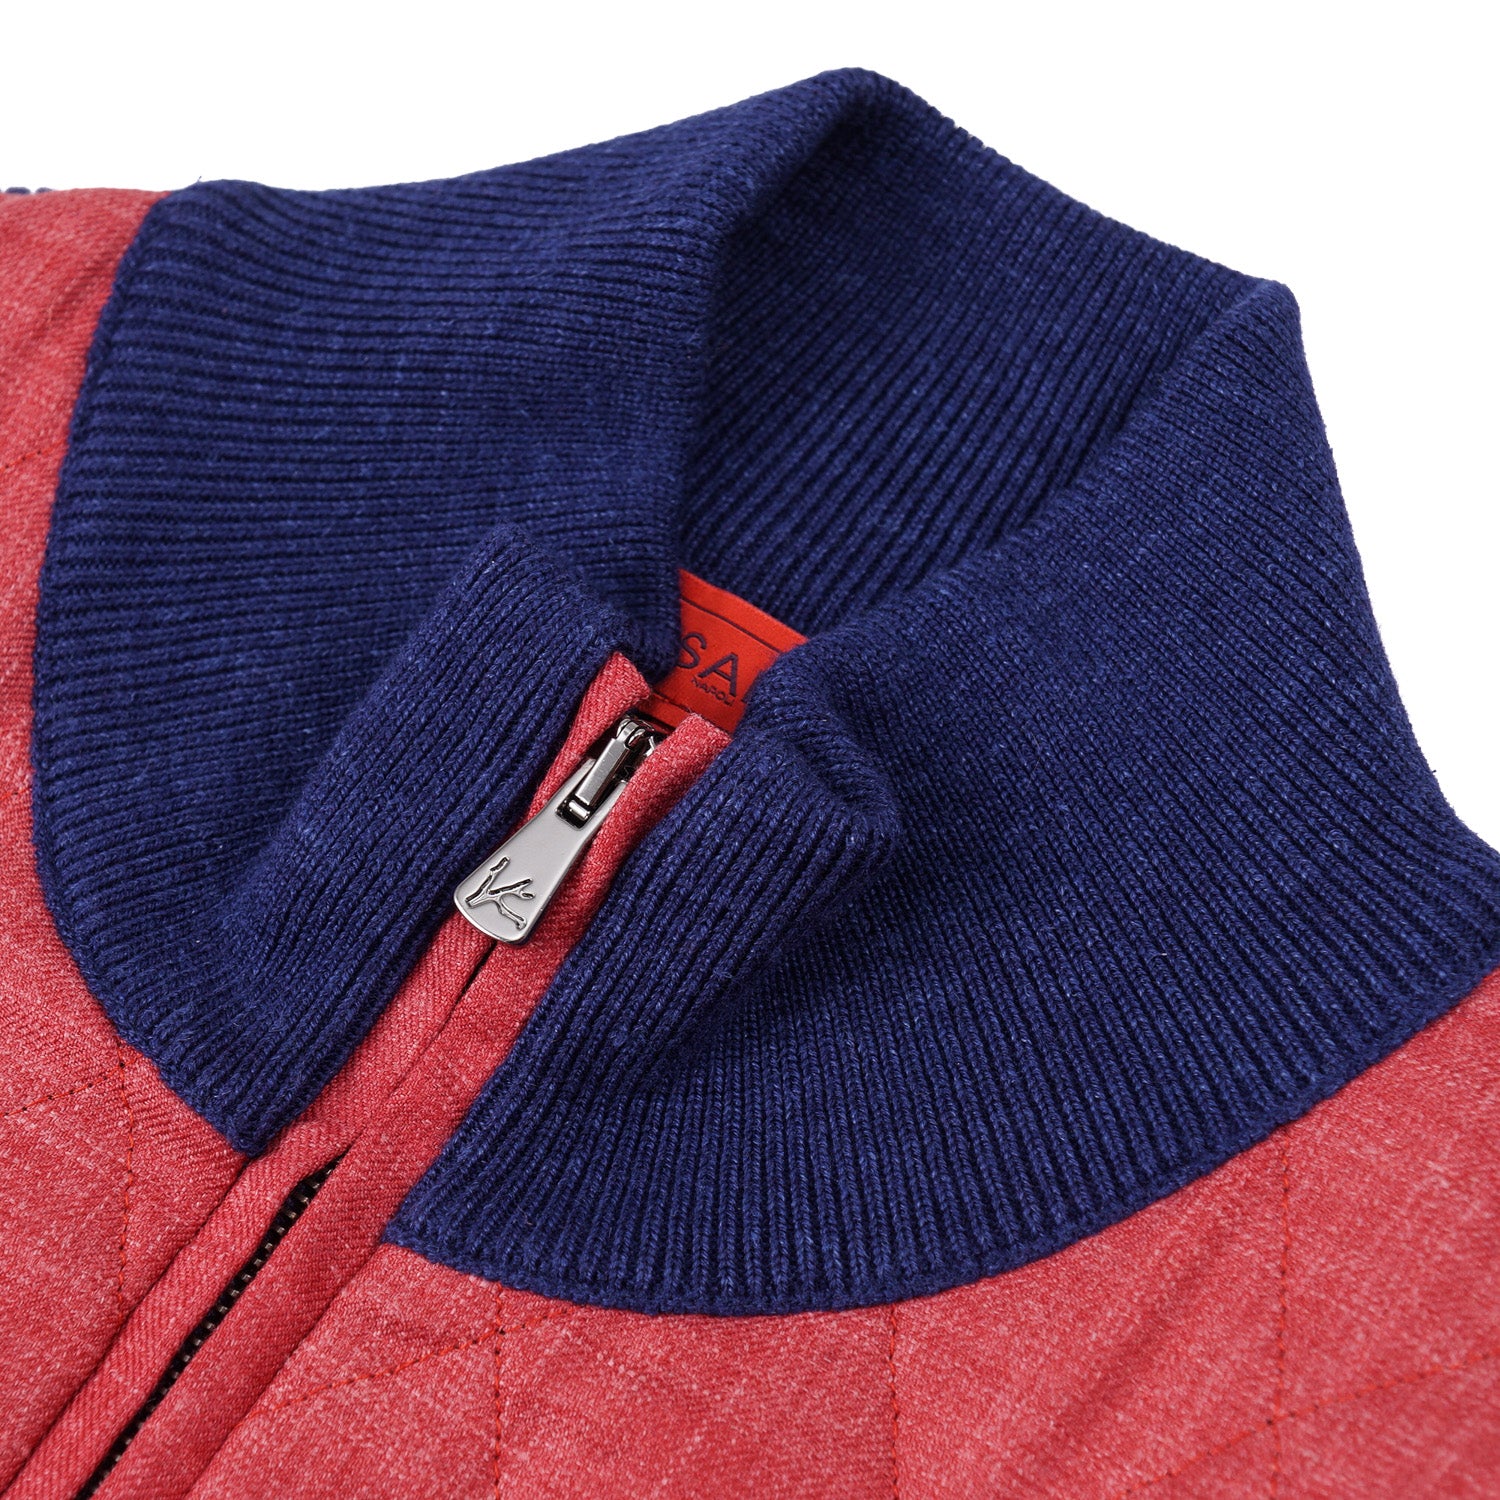 Isaia Knit Wool Bomber Jacket with Quilted Front - Top Shelf Apparel